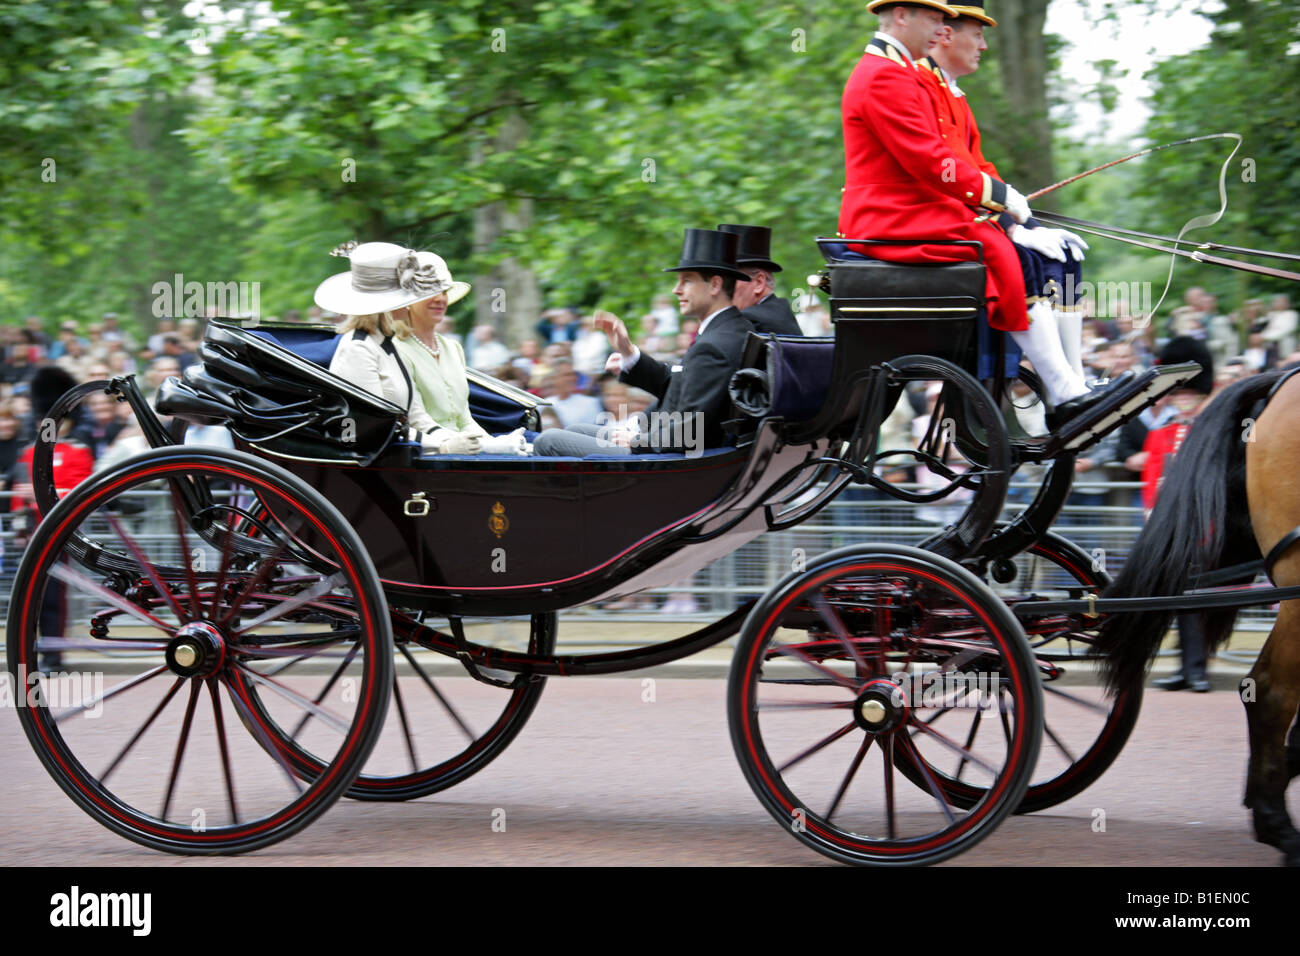 The Earl and Countess of Wessex and Duke and Duchess of Gloucester Returning to Buckingham Palace, Trooping the Colour 2008 Stock Photo